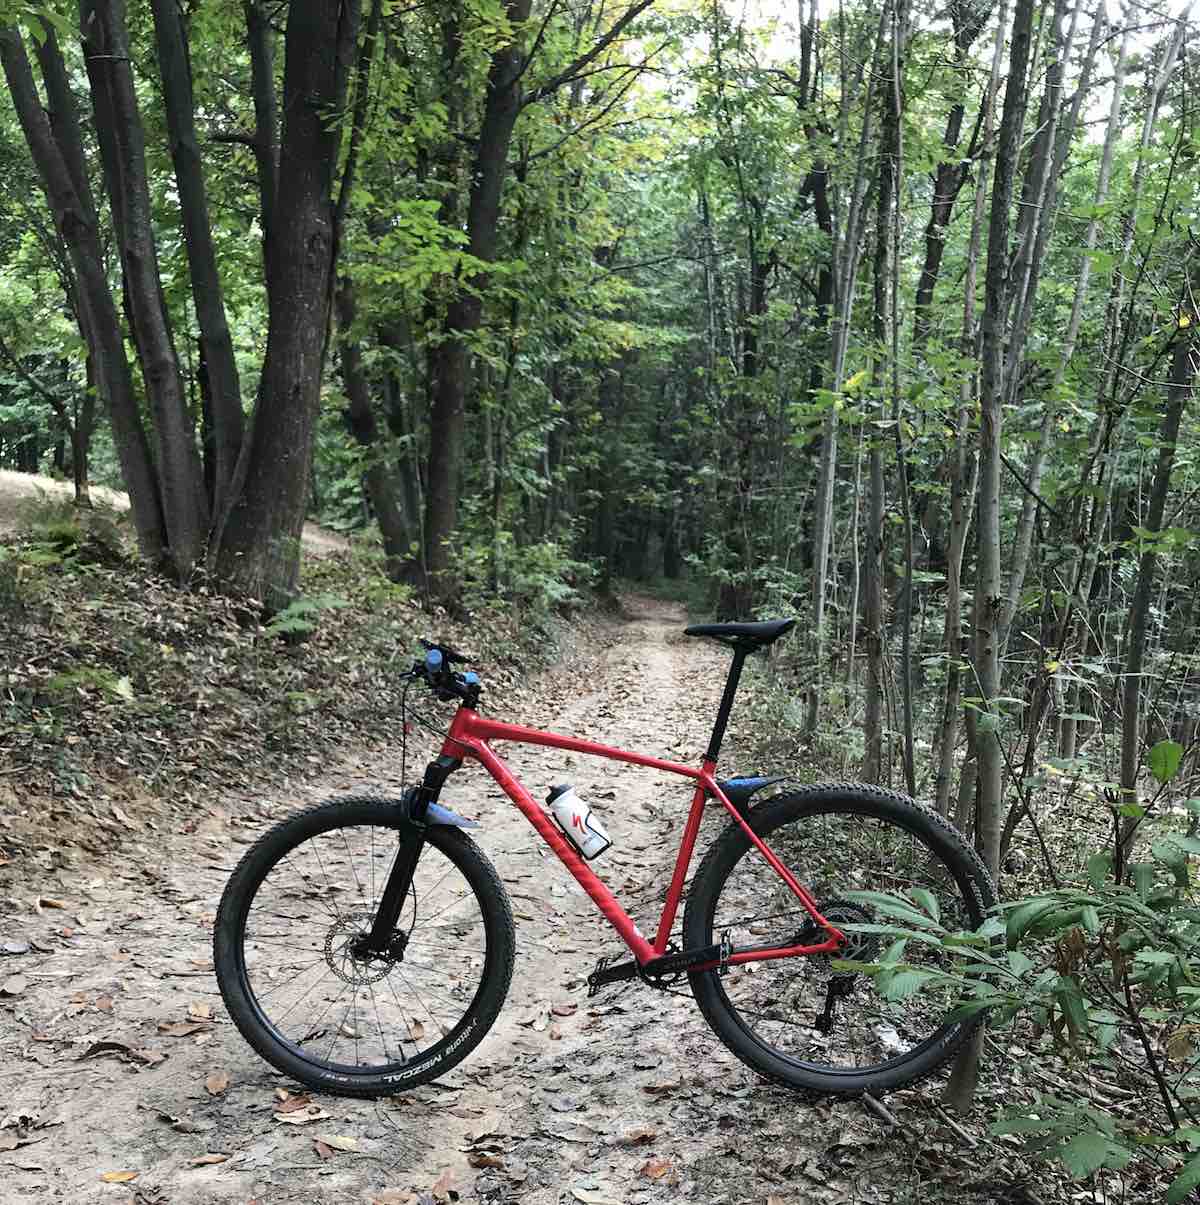 bikerumor pic of the day specialized mountain bike on a dirt path through dense woods in northern italy.